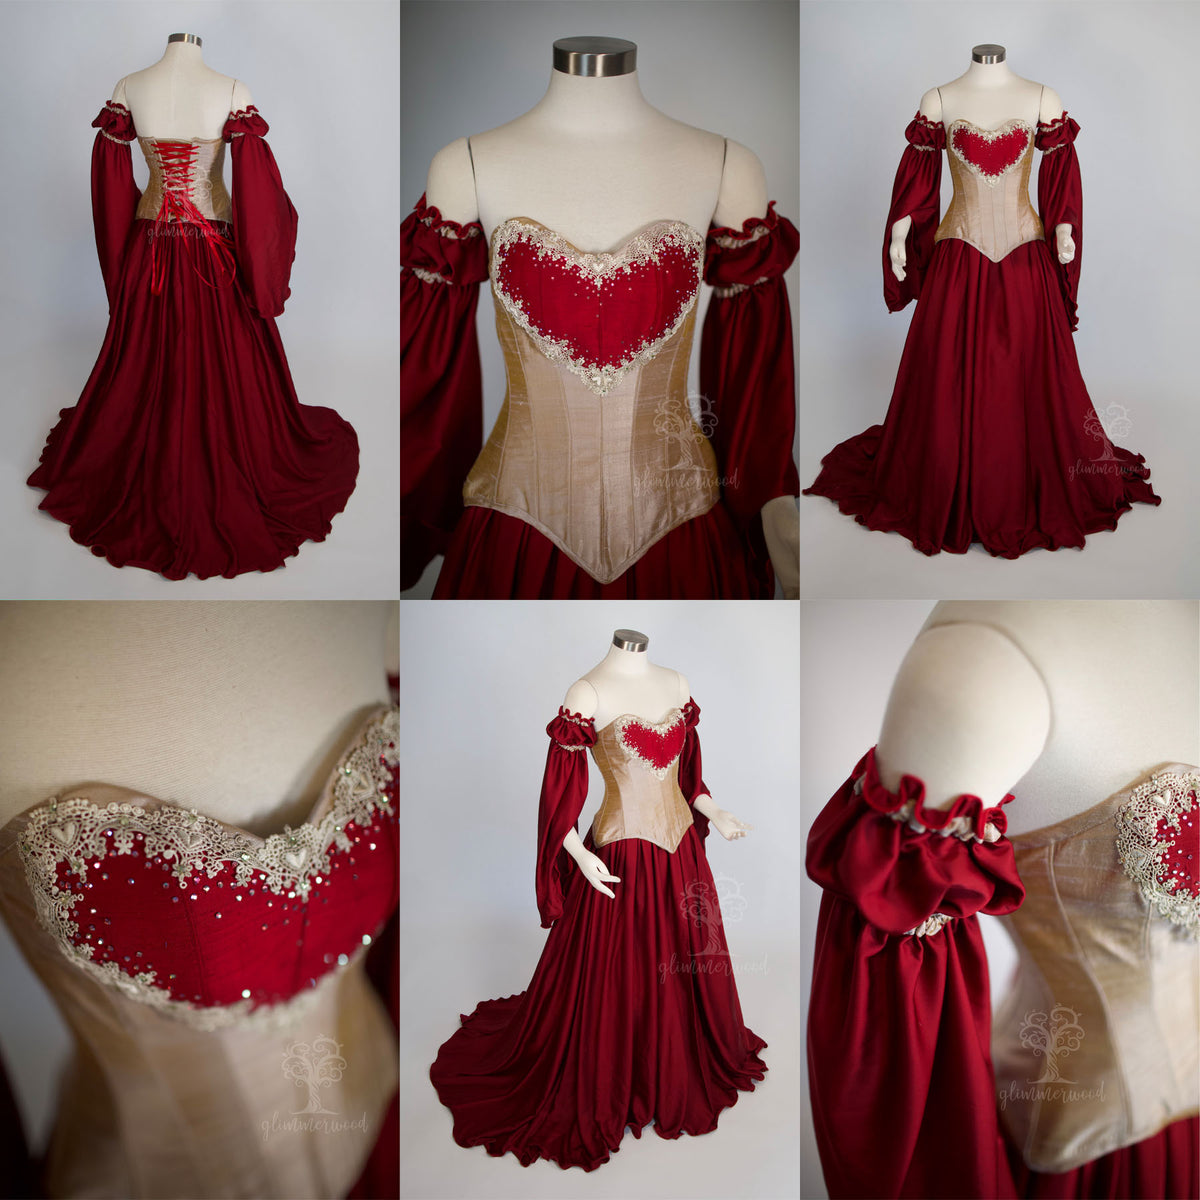 Marvelous Mystery Gown - Created with PURE Imagination